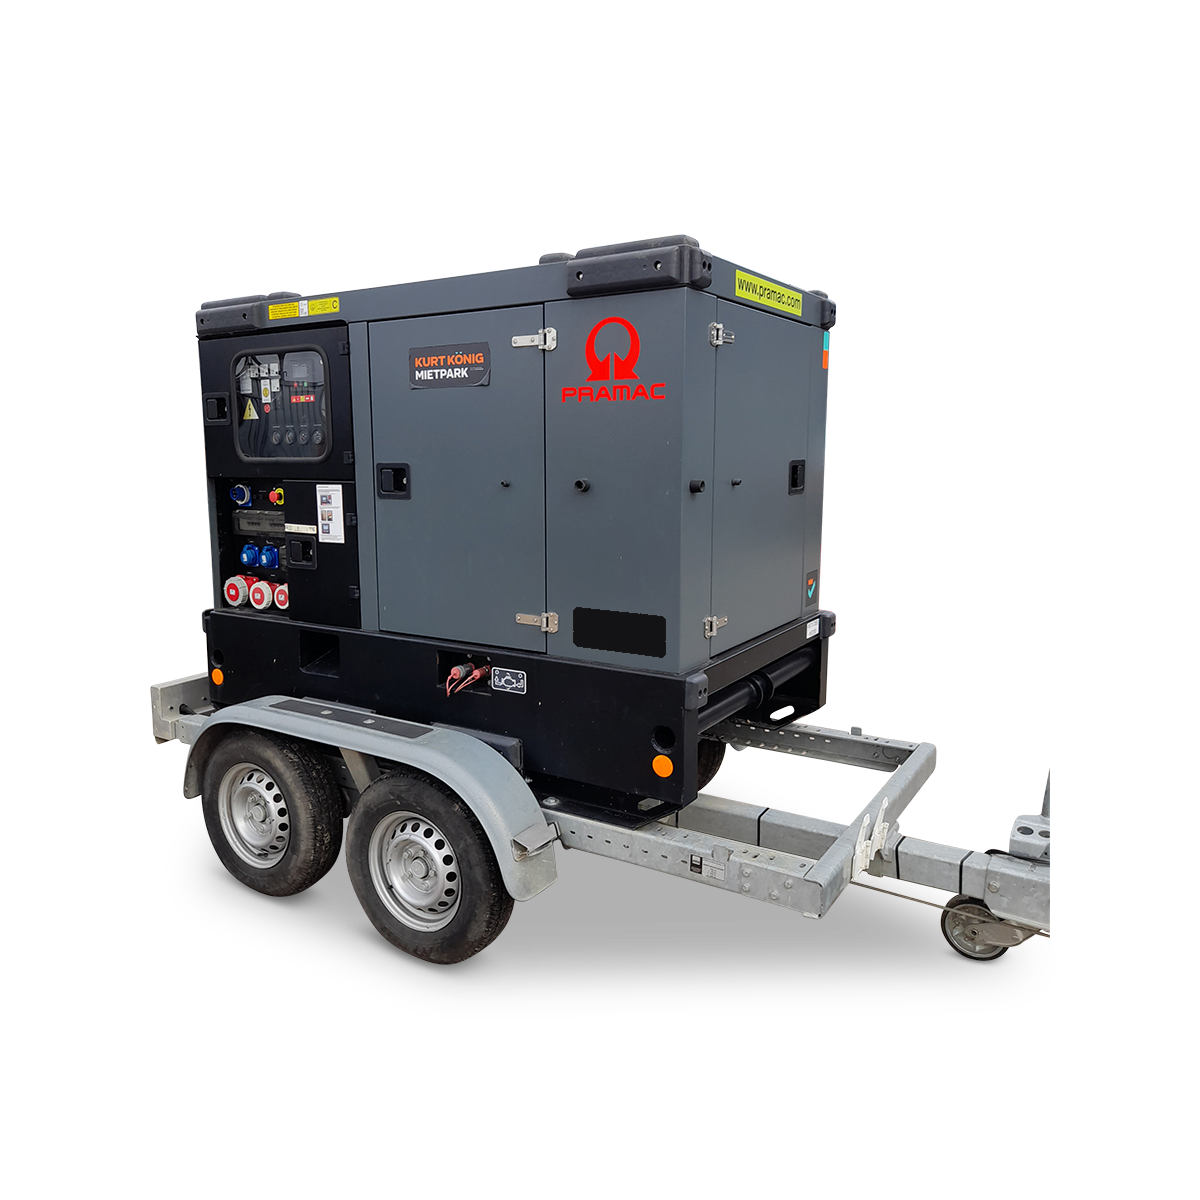 KKB Pramac Power generator 35 kVA with road chassis GRW 35